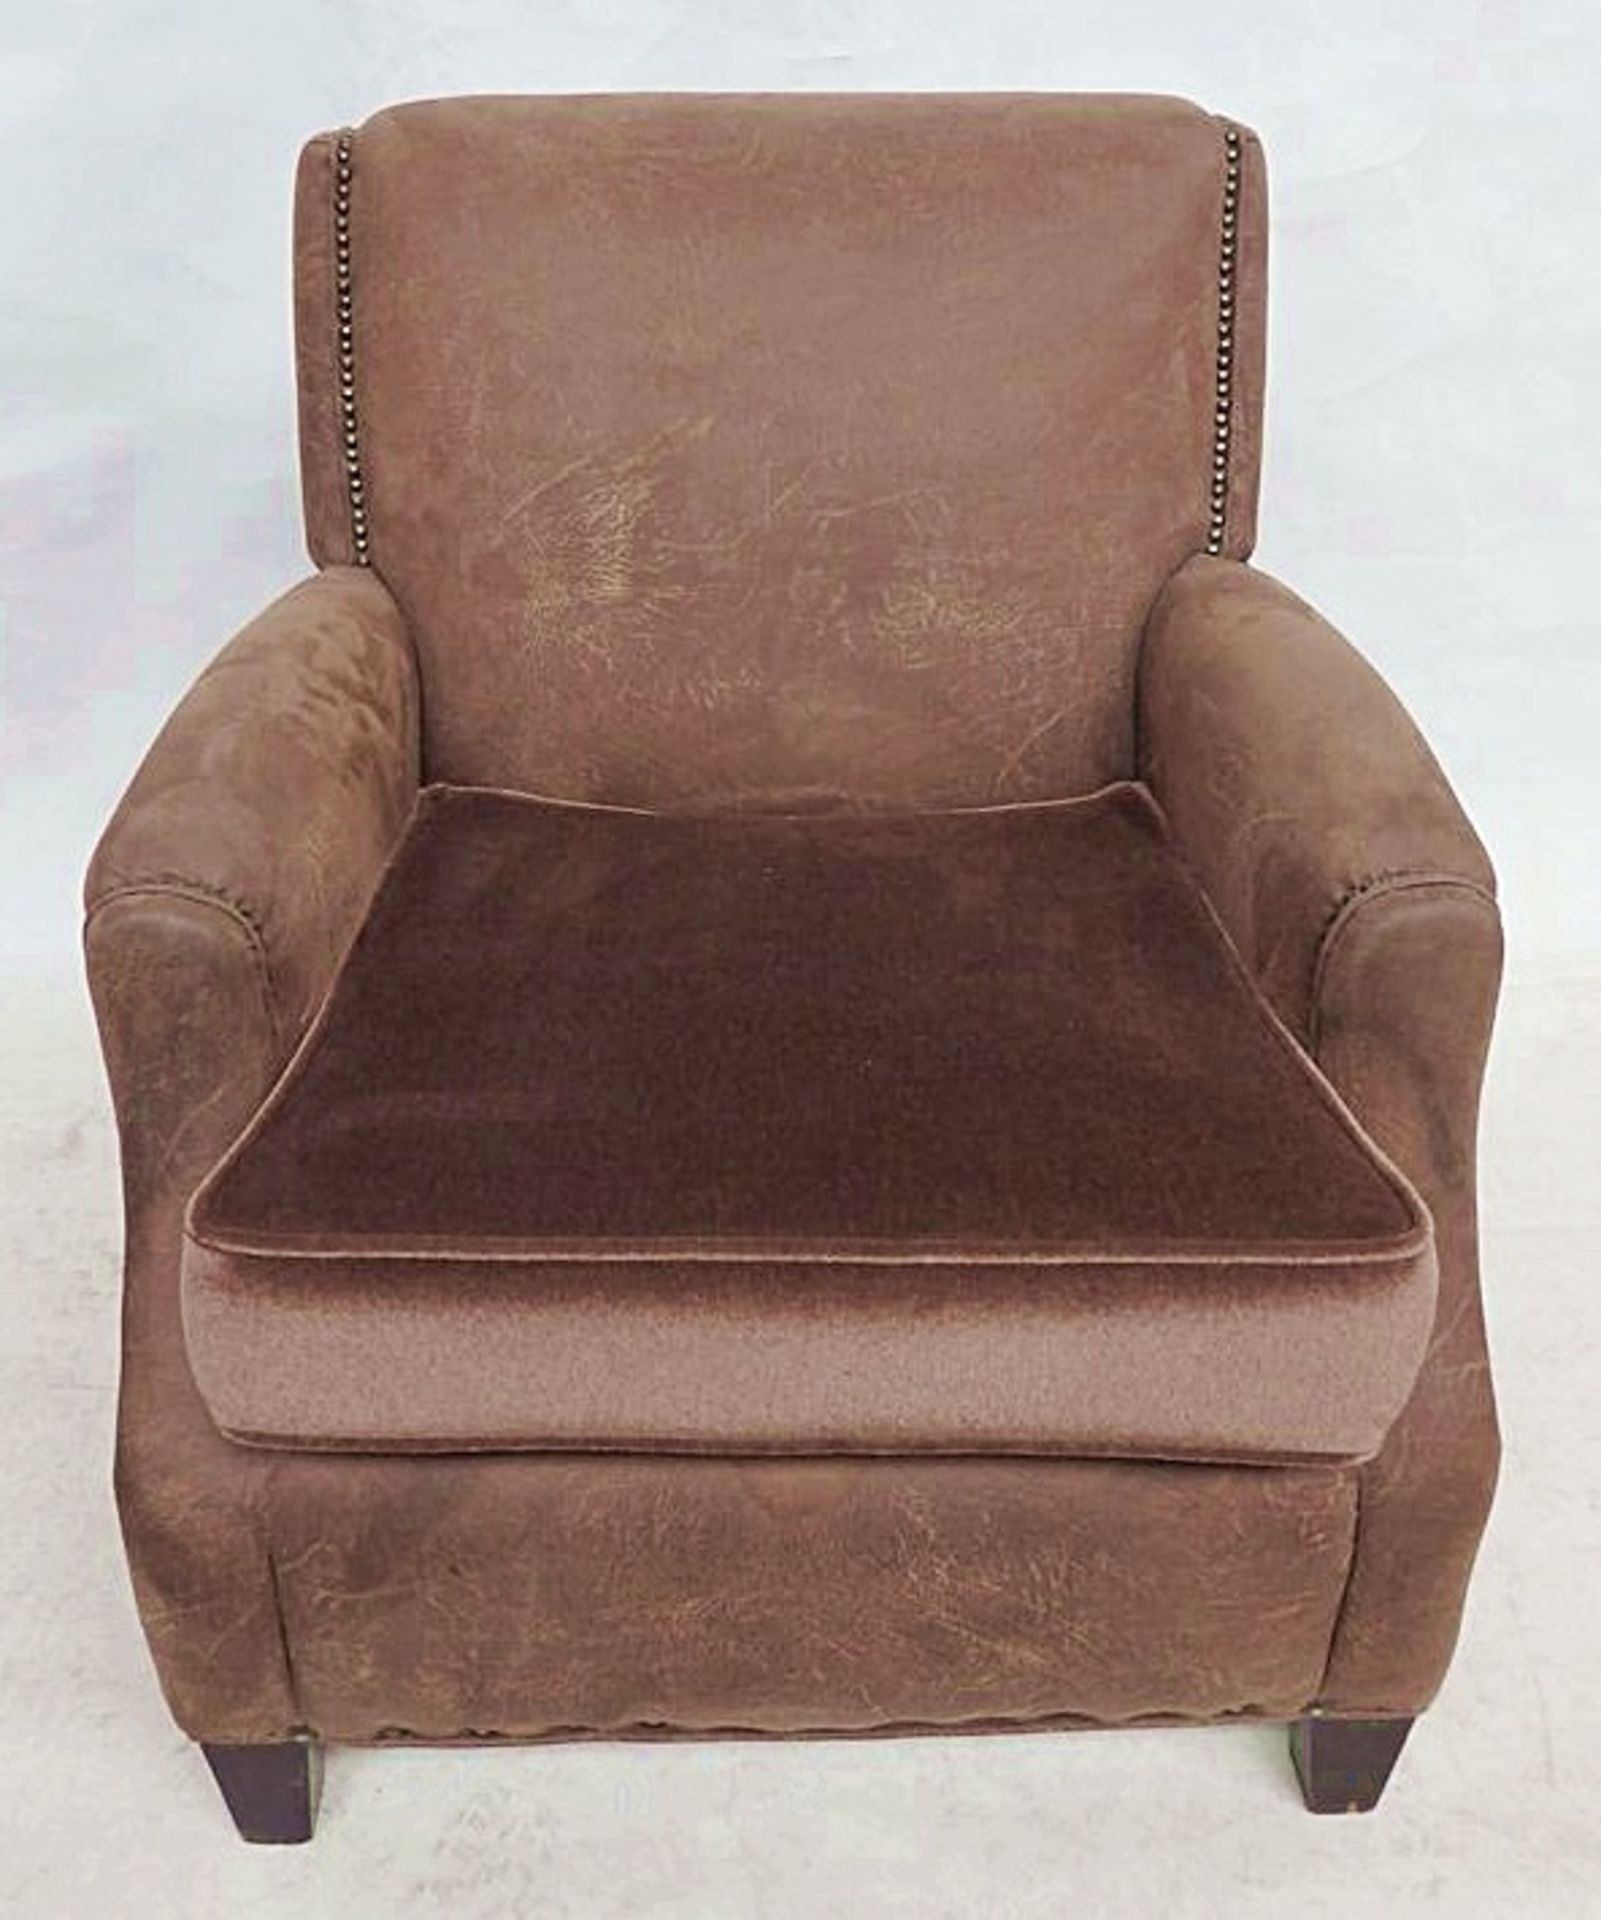 1 x Bespoke Brown Leather & Chenille Armchair - Expertly Built And Upholstered By British